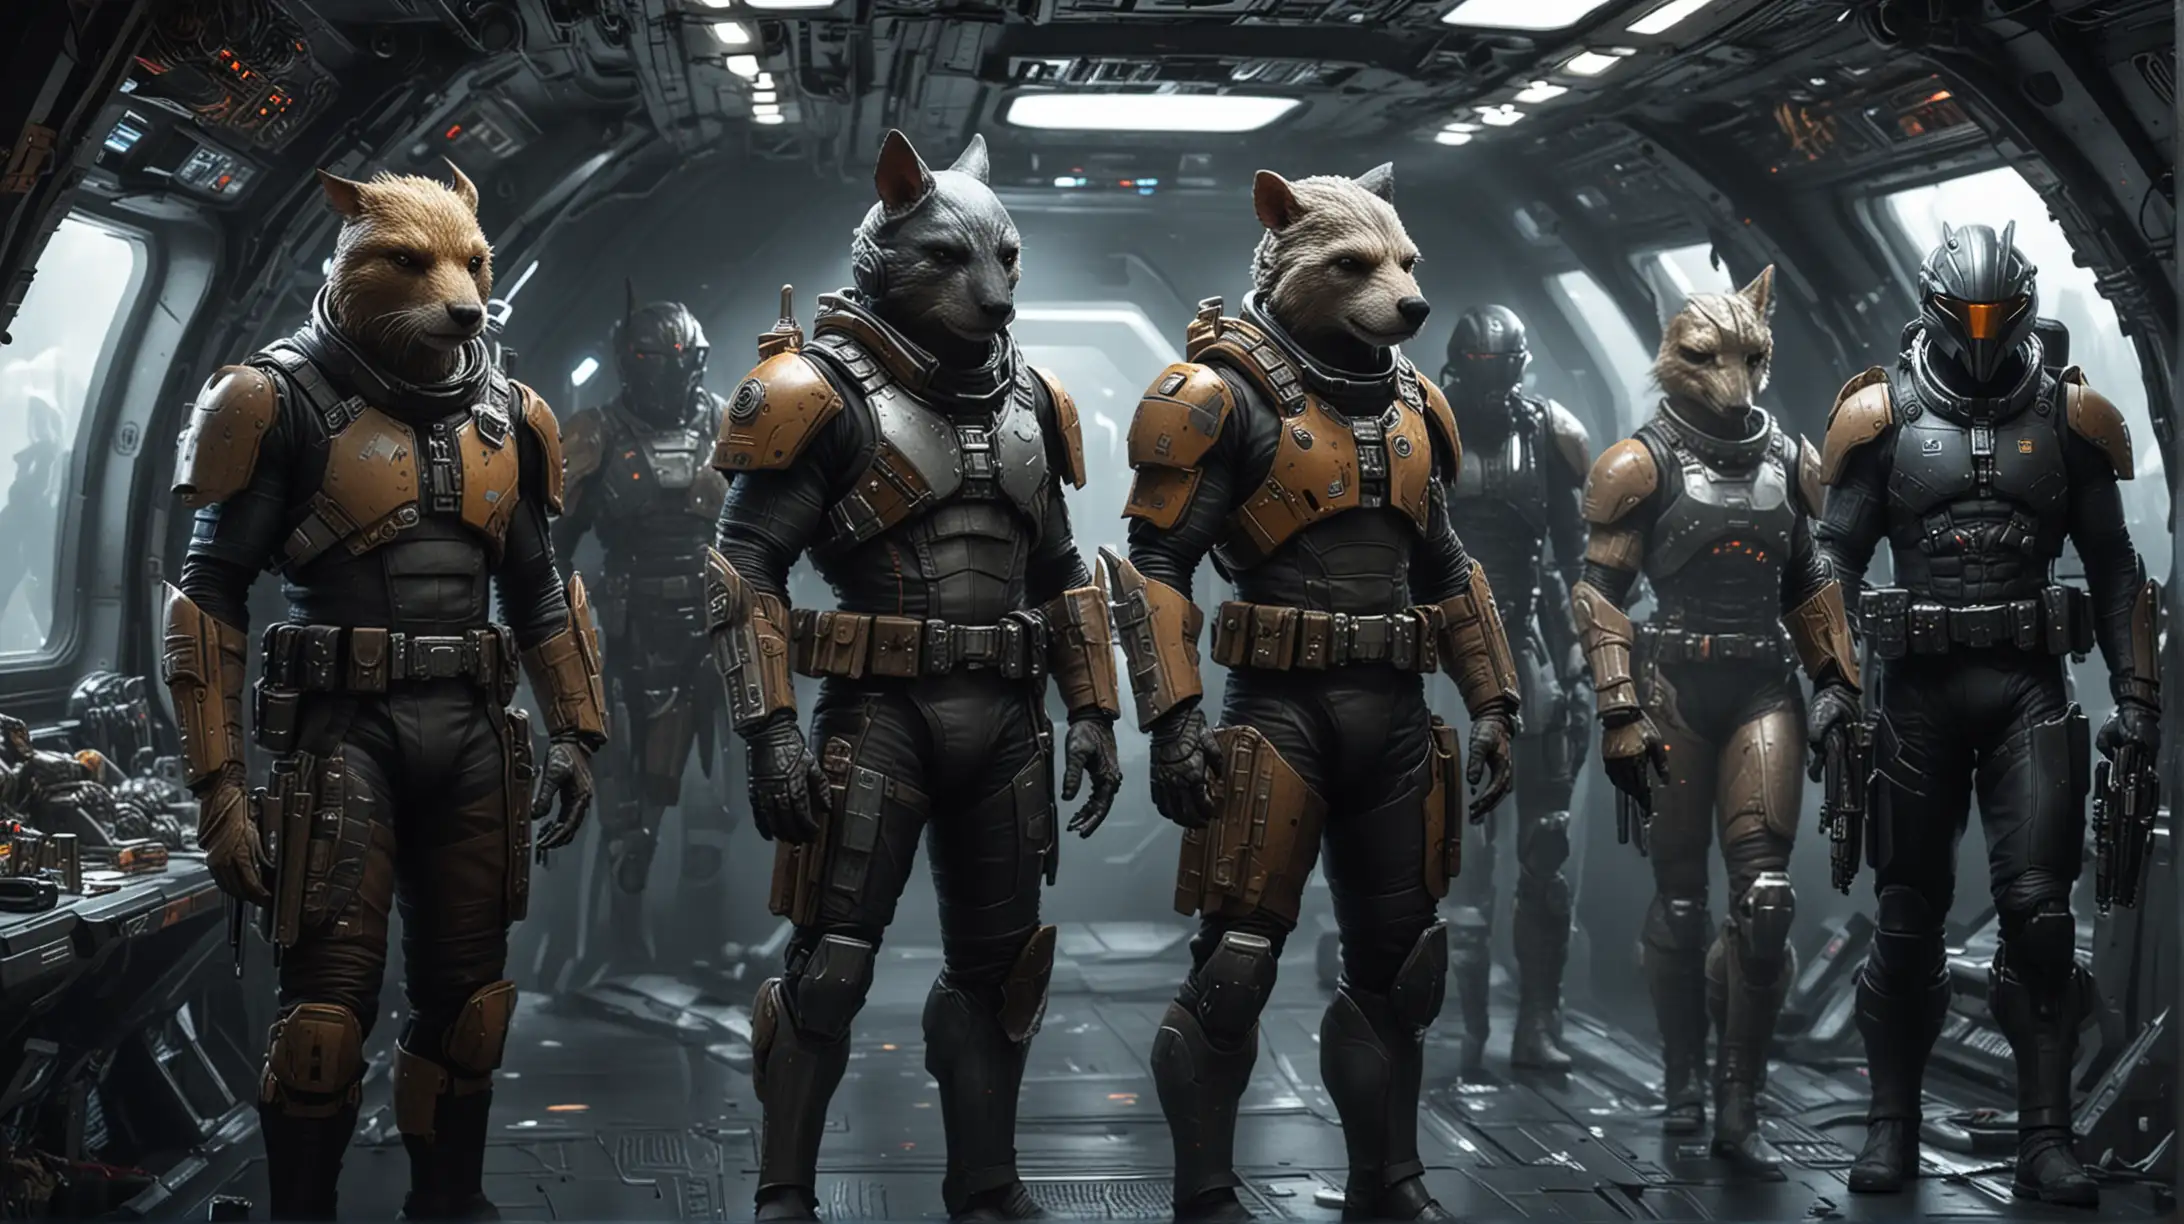 various bounty hunters stood in a space-ship interior, each figure is an anthropomorphic form of various animals with a futuristic twist, detailed fantasy art